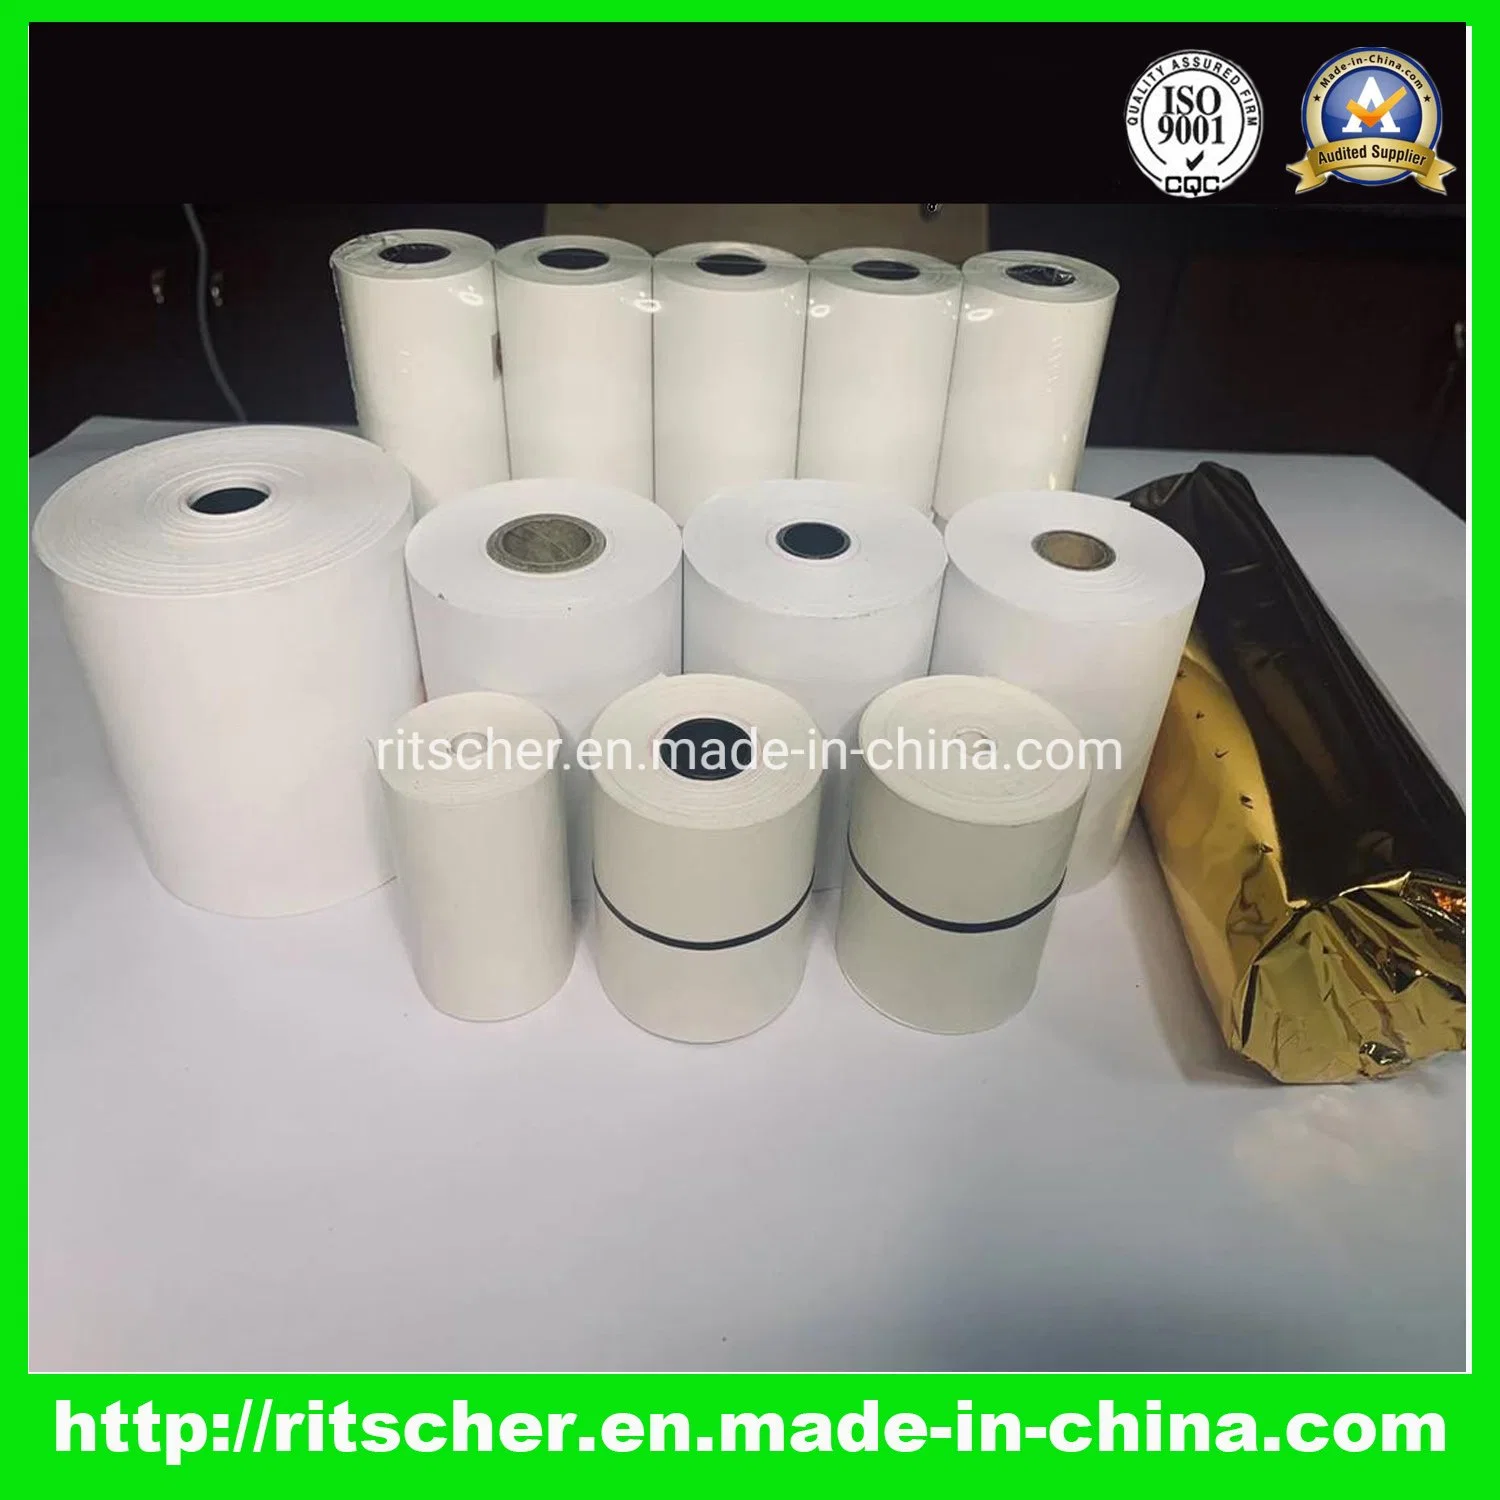 Thermal Paper Roll of 80X80 Cash Register Paper Roll